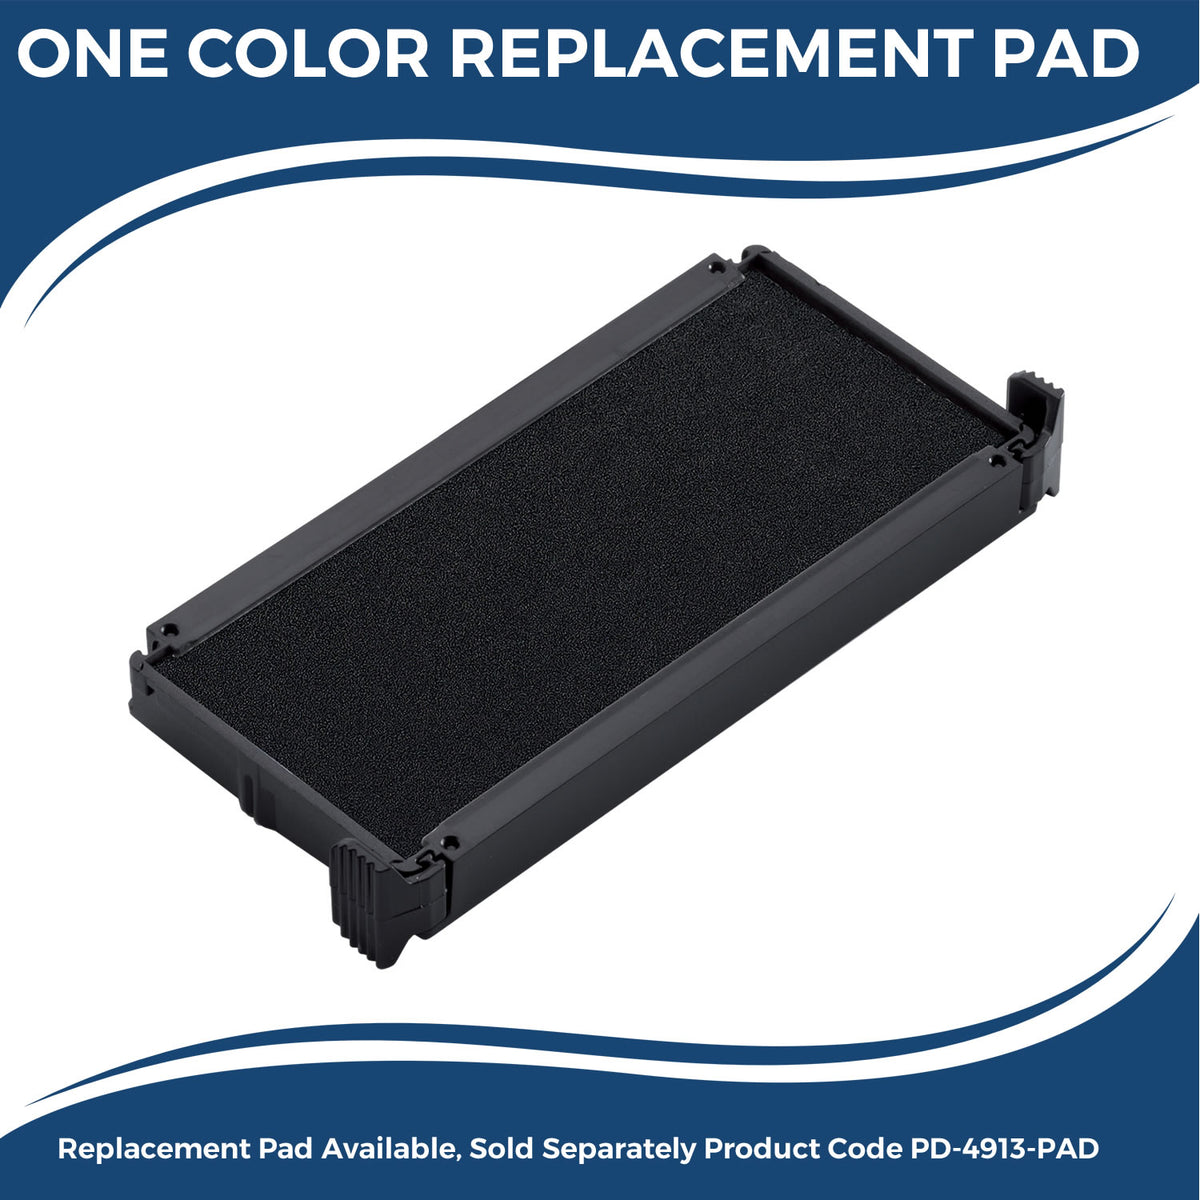 Large Self-Inking Viral Load Stamp 4998S Large Replacment Pad